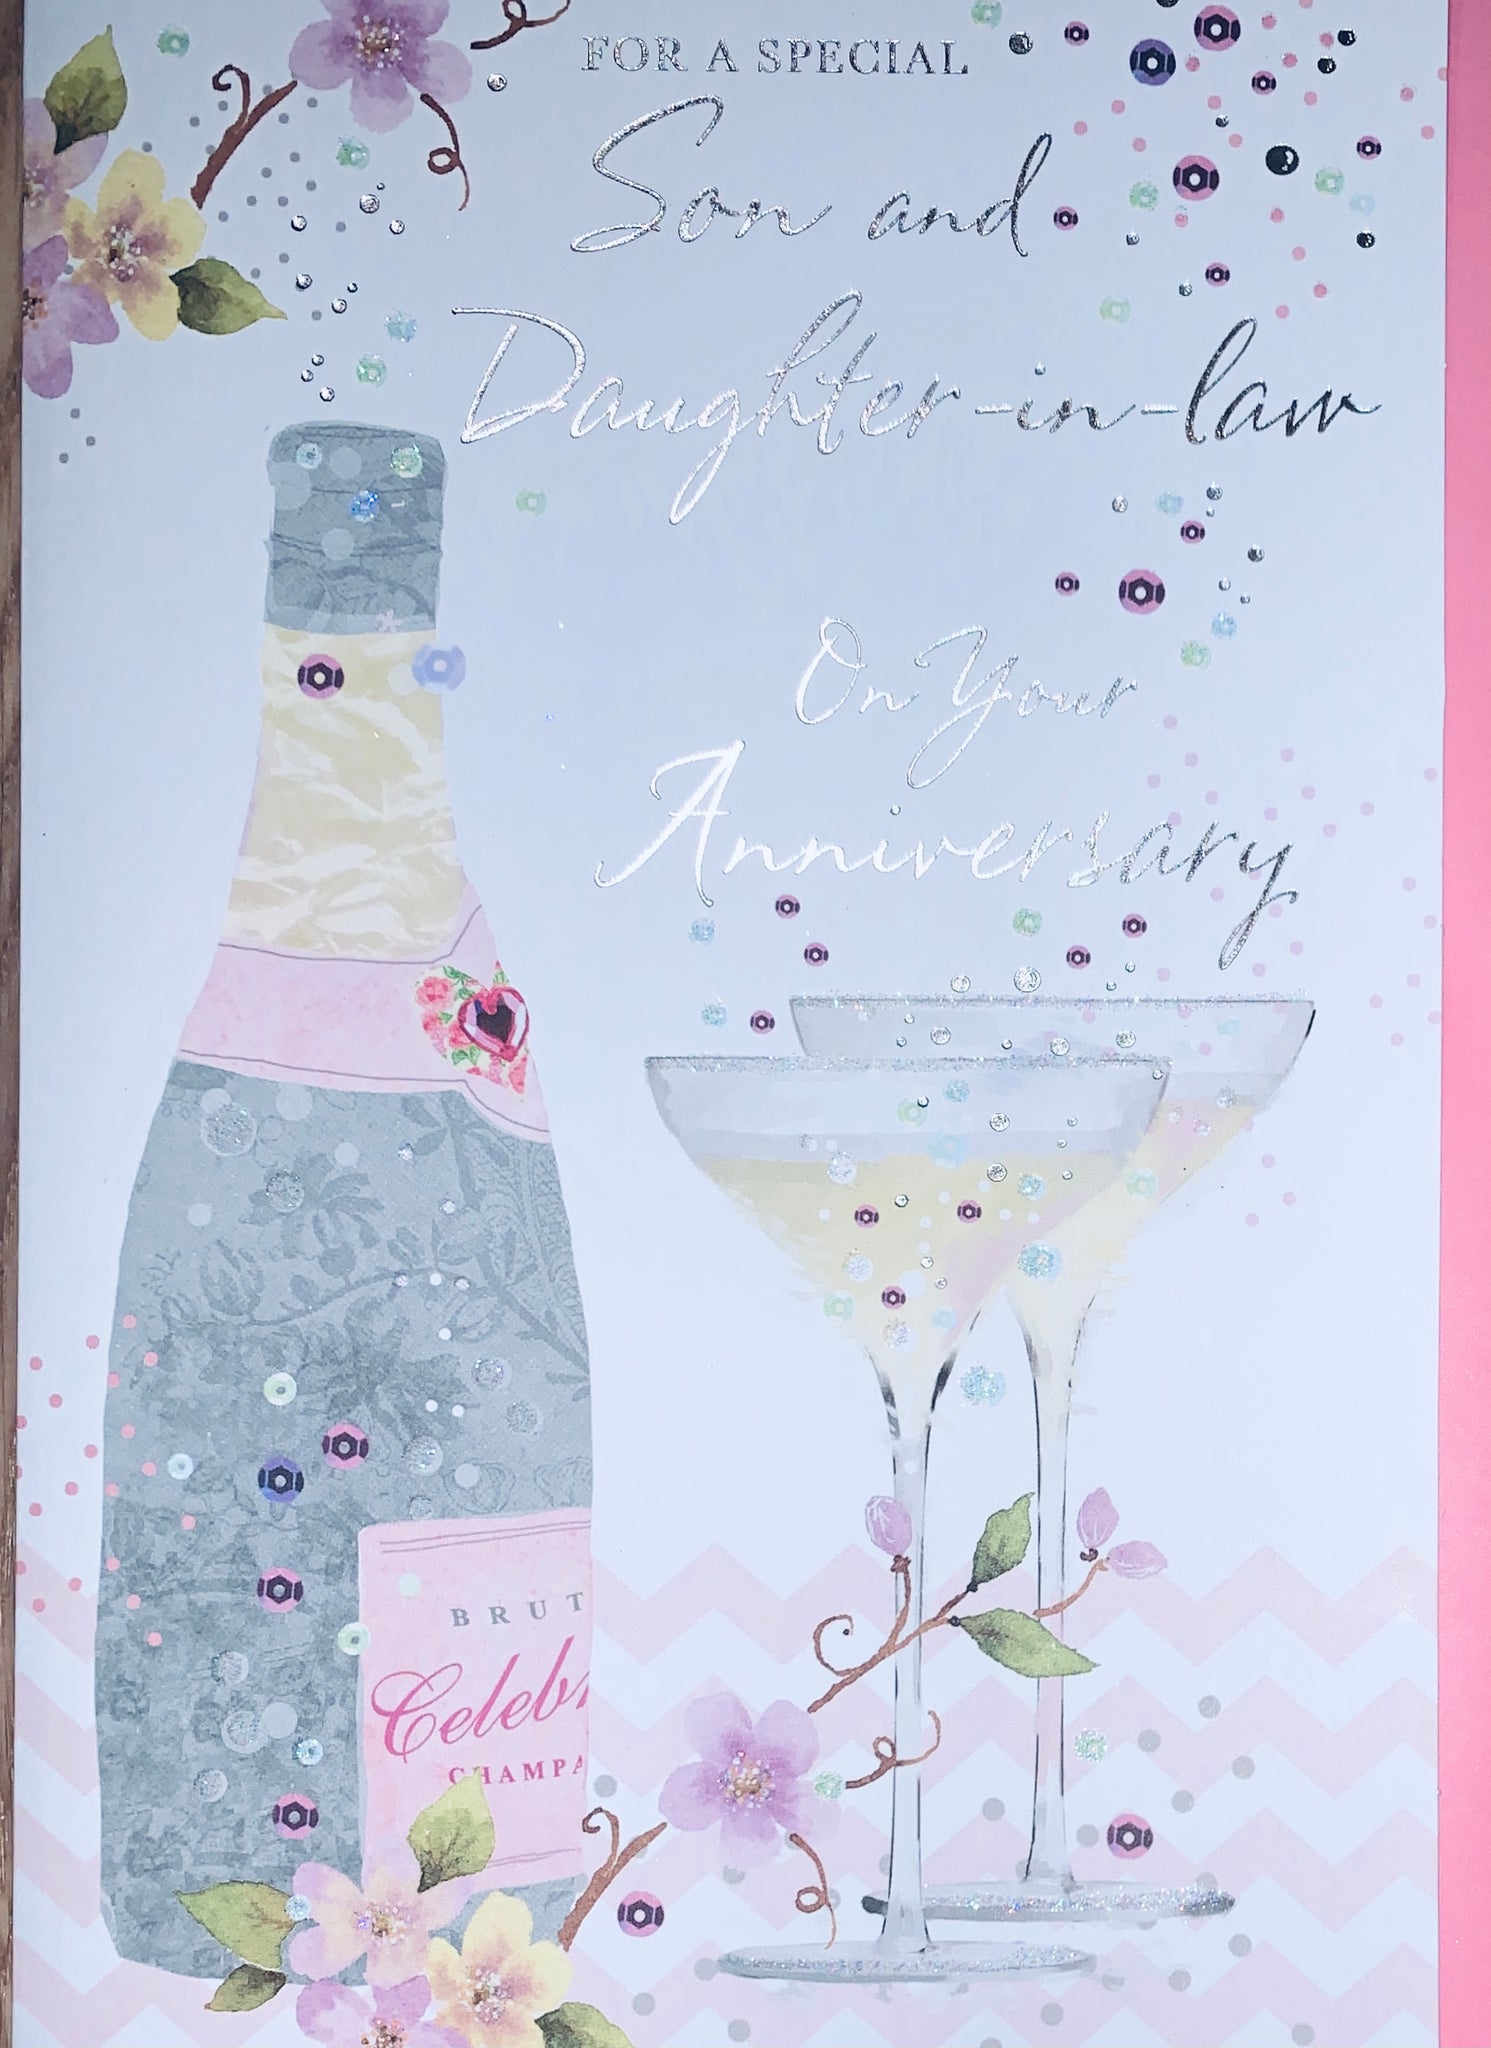 Son and Daughter-in-law anniversary card - champagne